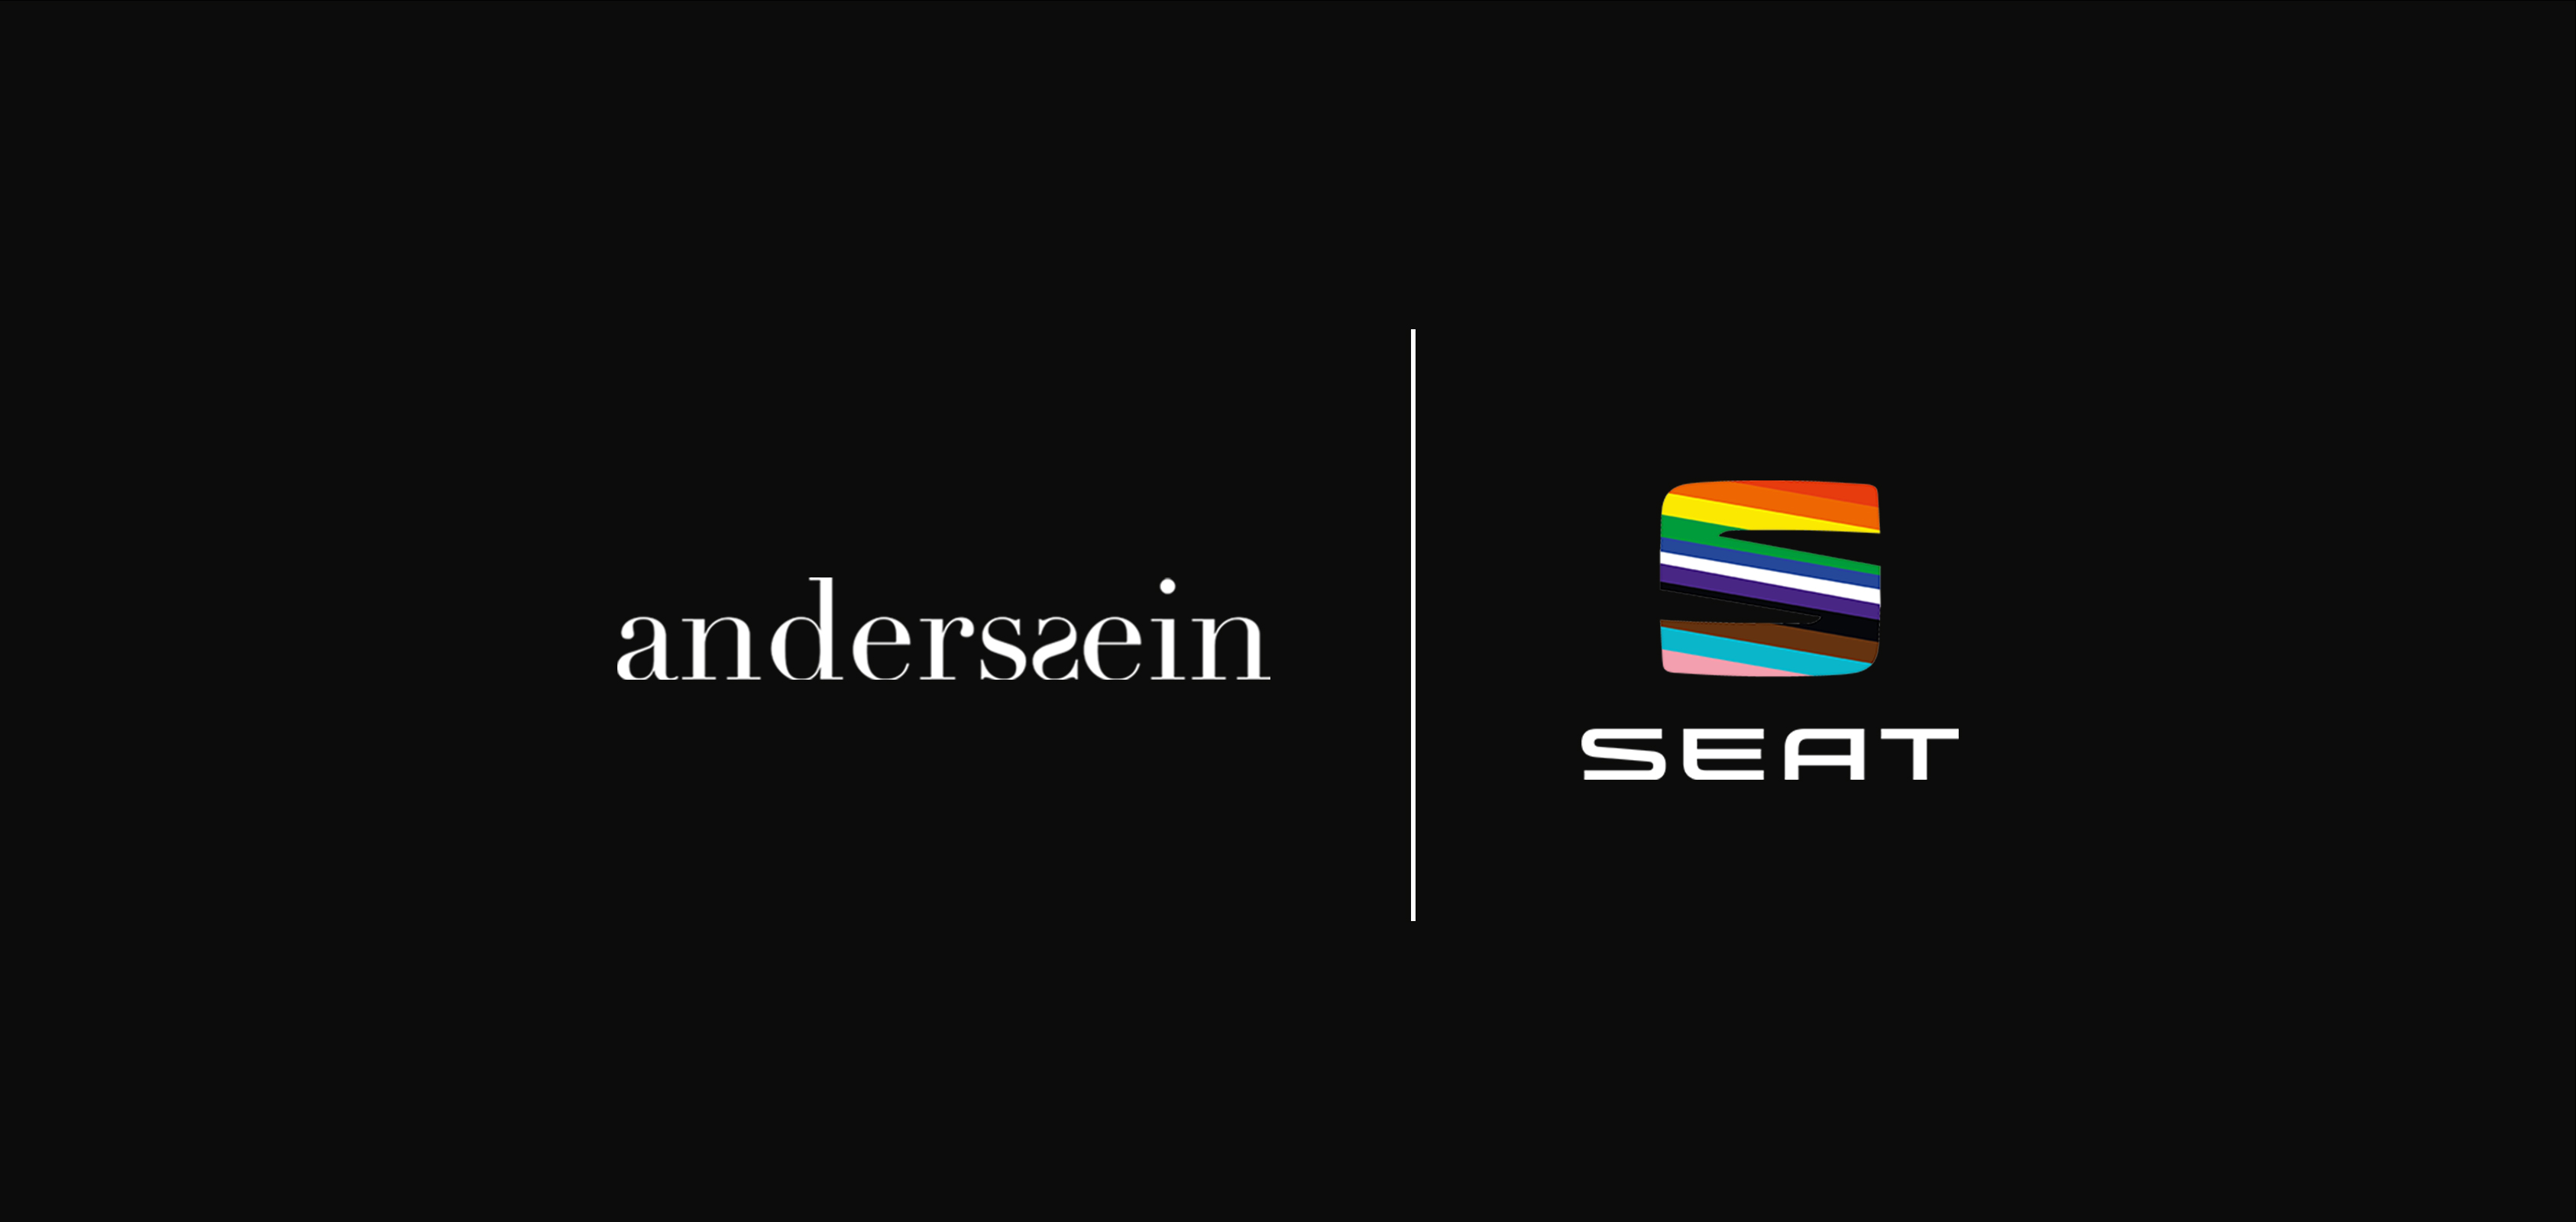 anderssein - by SEAT